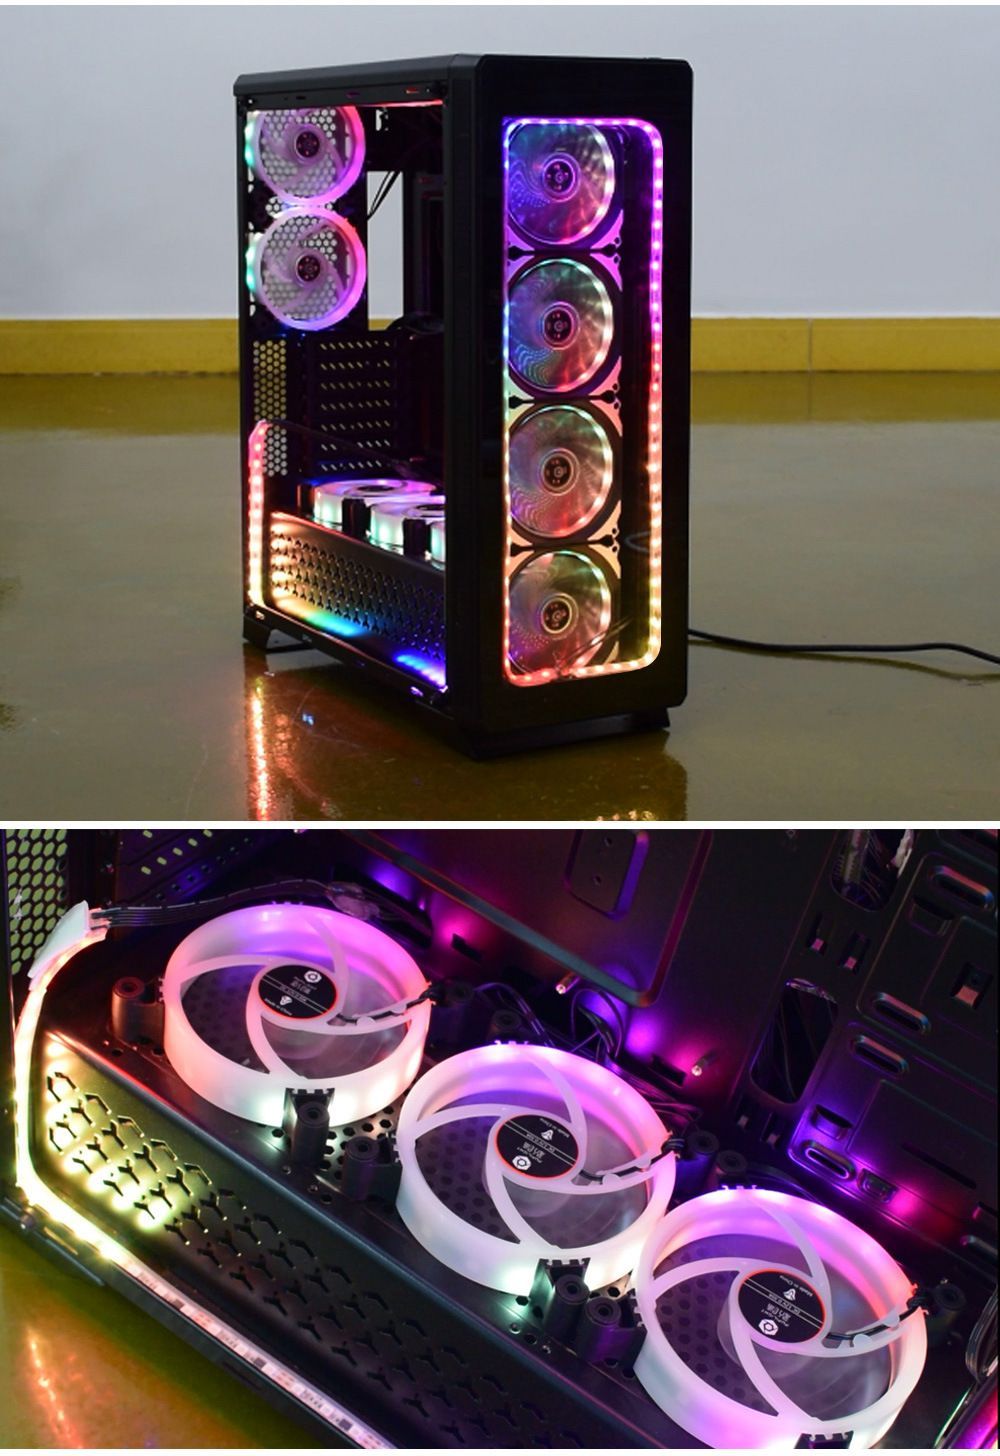 Geek-12cm-RGB-LED-Light-Computer-Case-Cooling-Fan-Support-PC-Software-Control-1381419